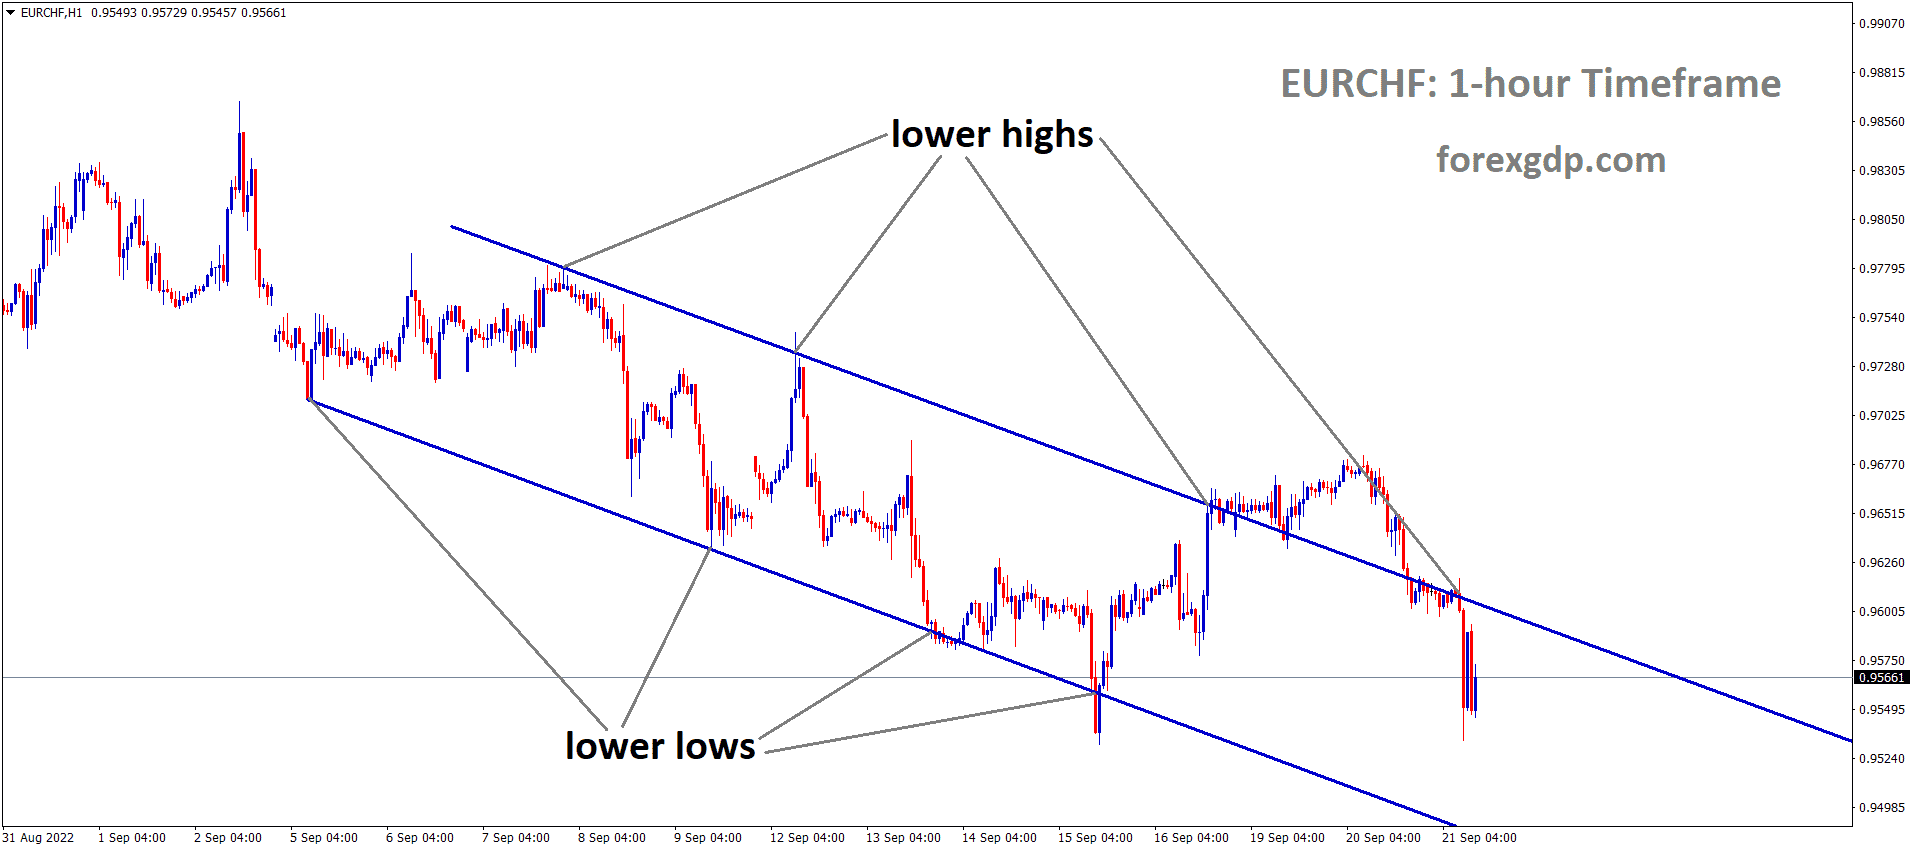 EURCHF is moving in the Descending channel and the market has fallen from the lower high area of the channel 2